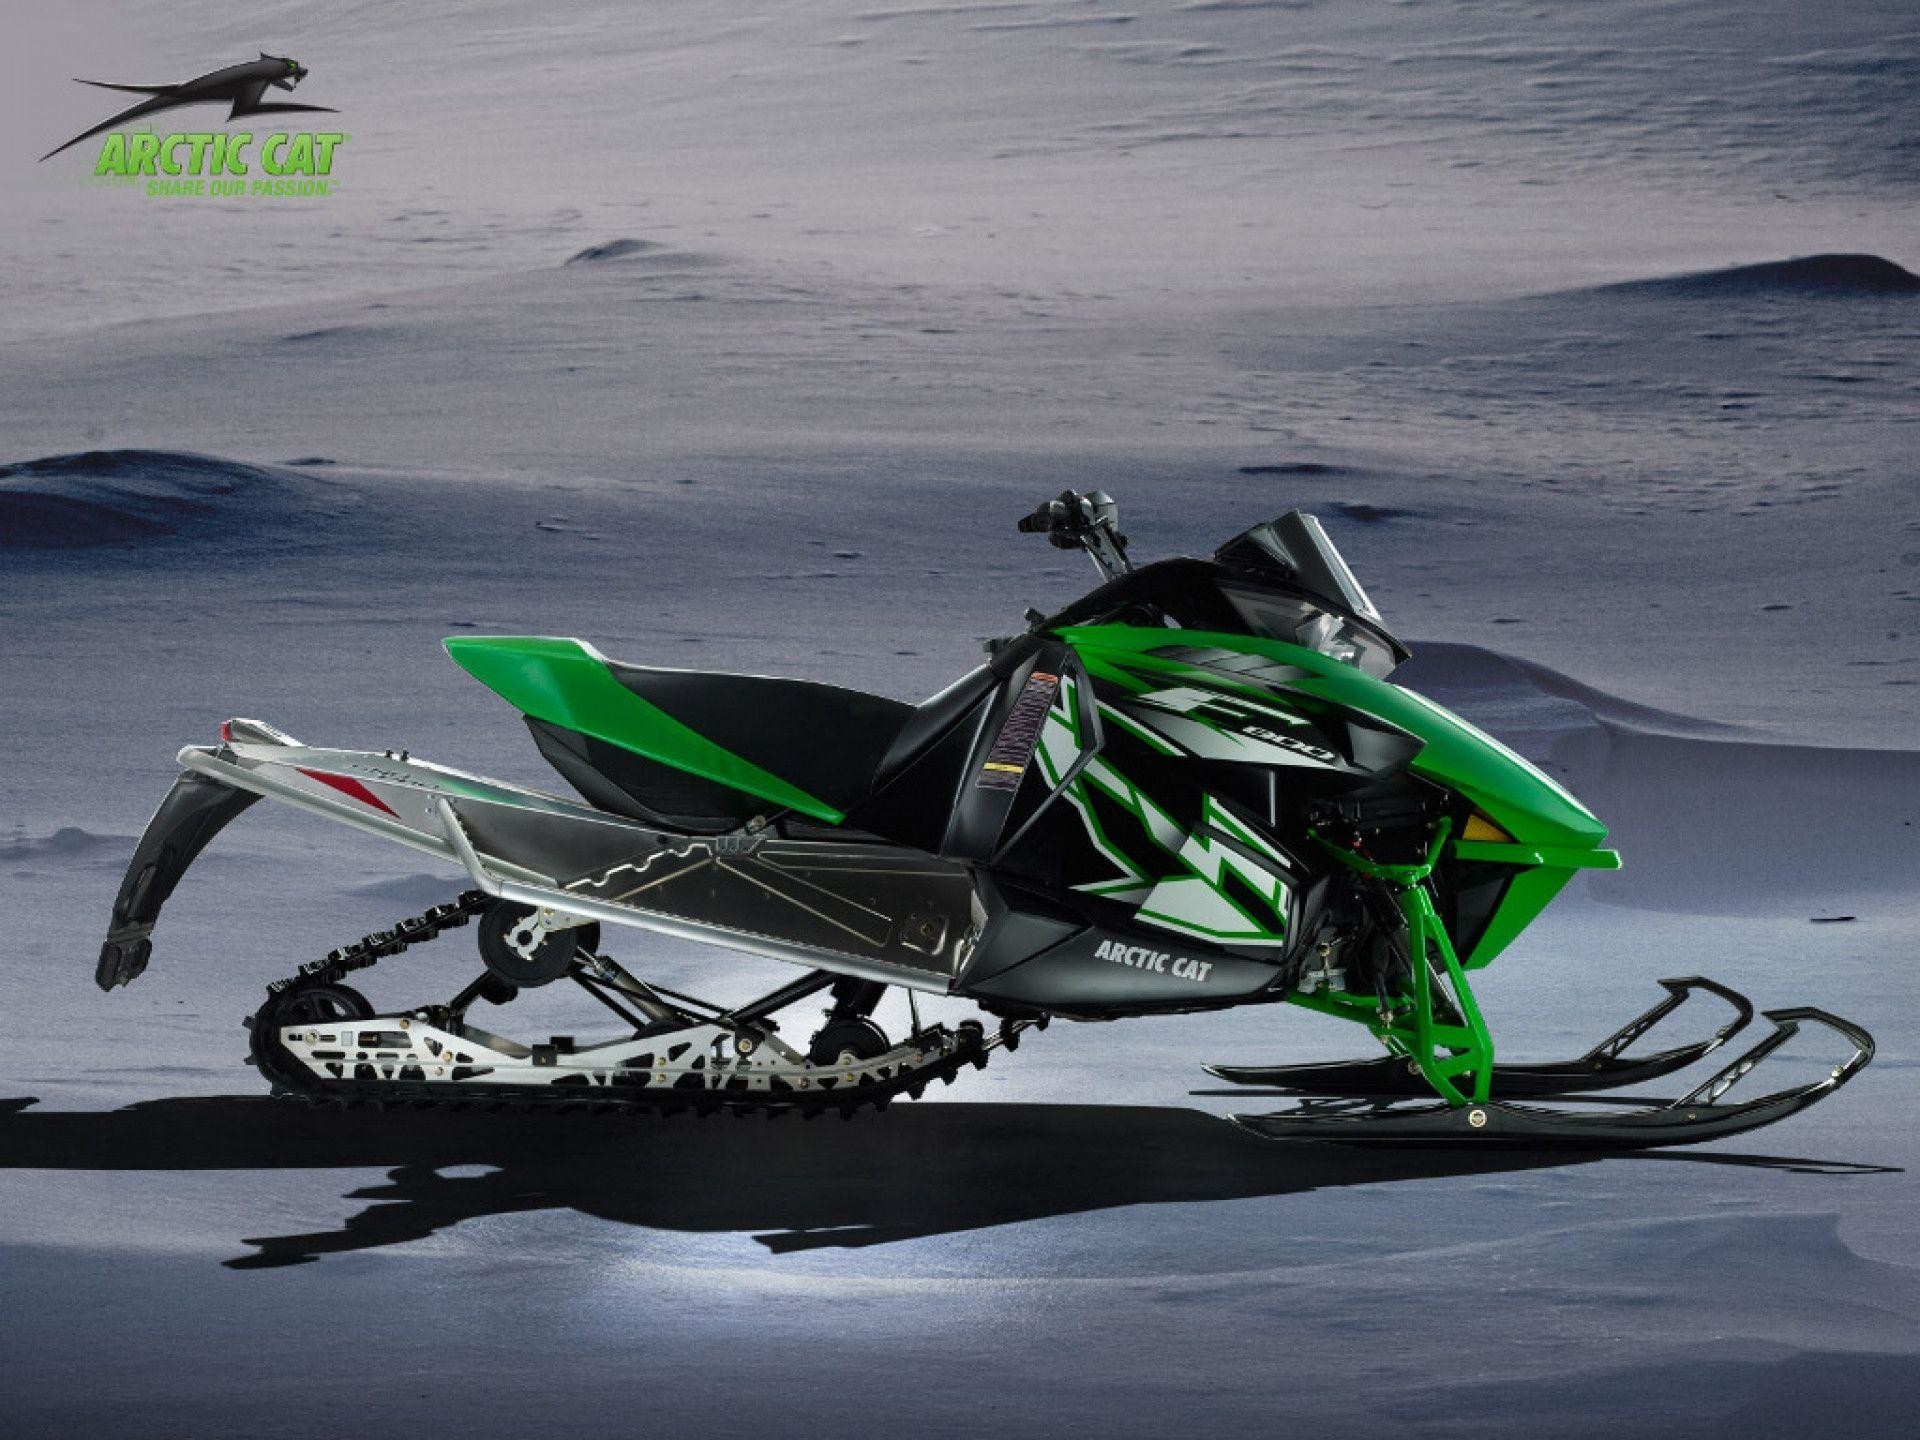 1920x1440 Snowmobile Wallpaper - Wallpapers Browse